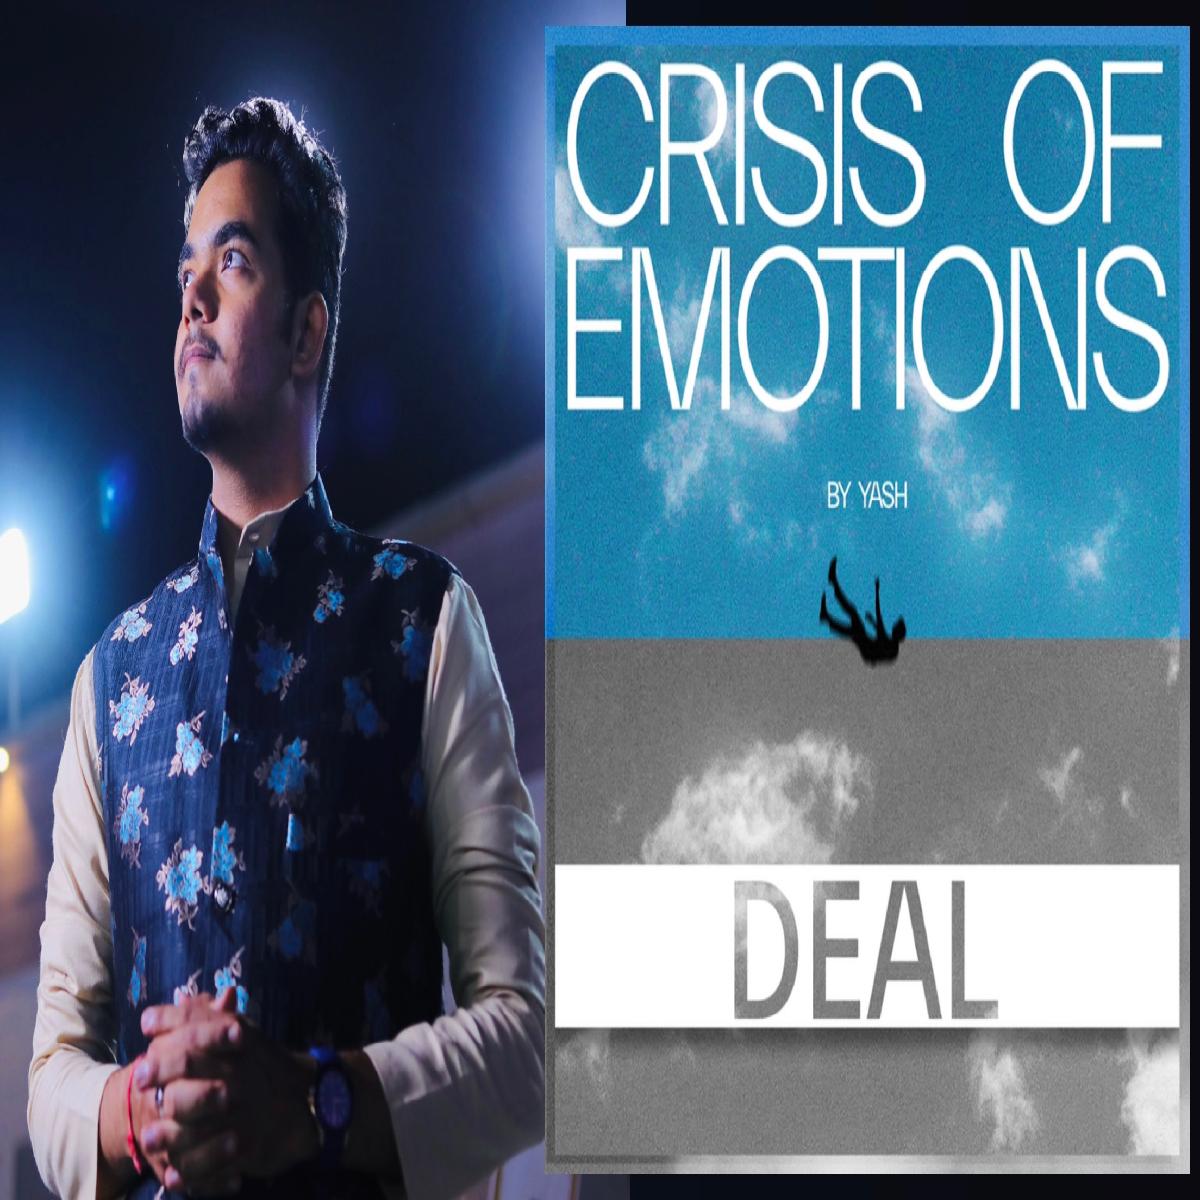 Upcoming artist Yash dropped his Second track from the album Crisis Of Emotions - Deal.